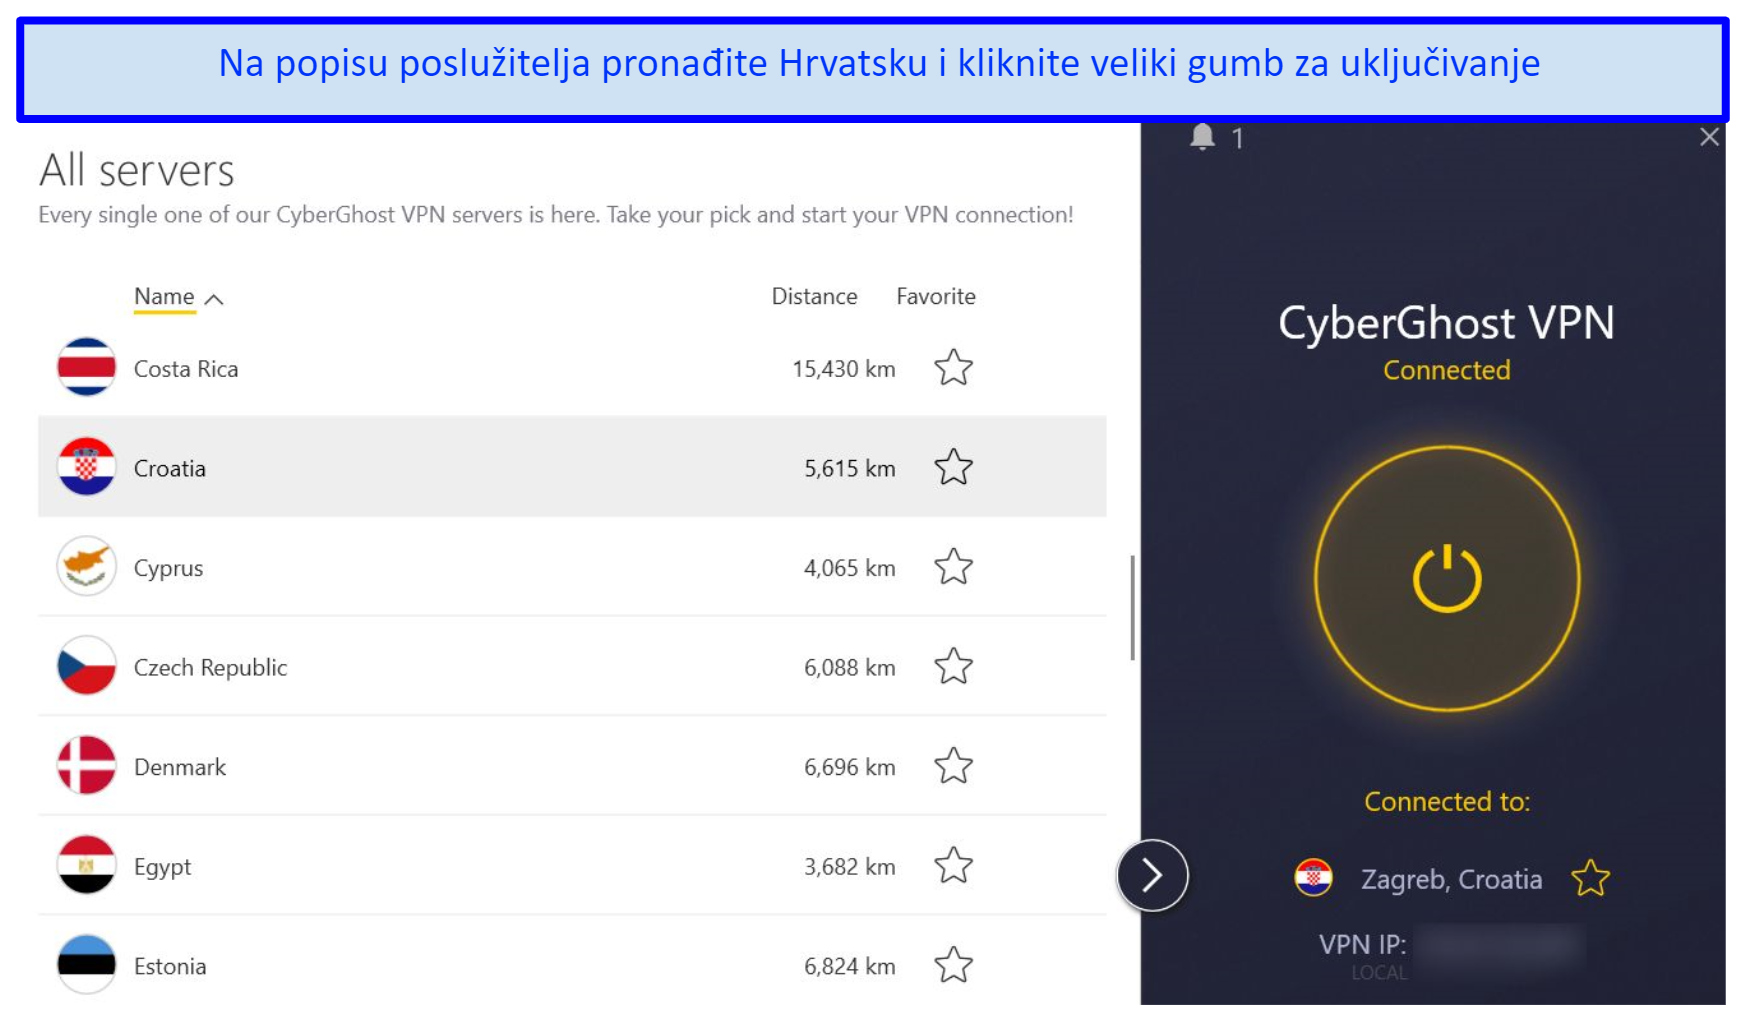 A snapshot showing how to find the Croatian server from CyberGhost's list of servers